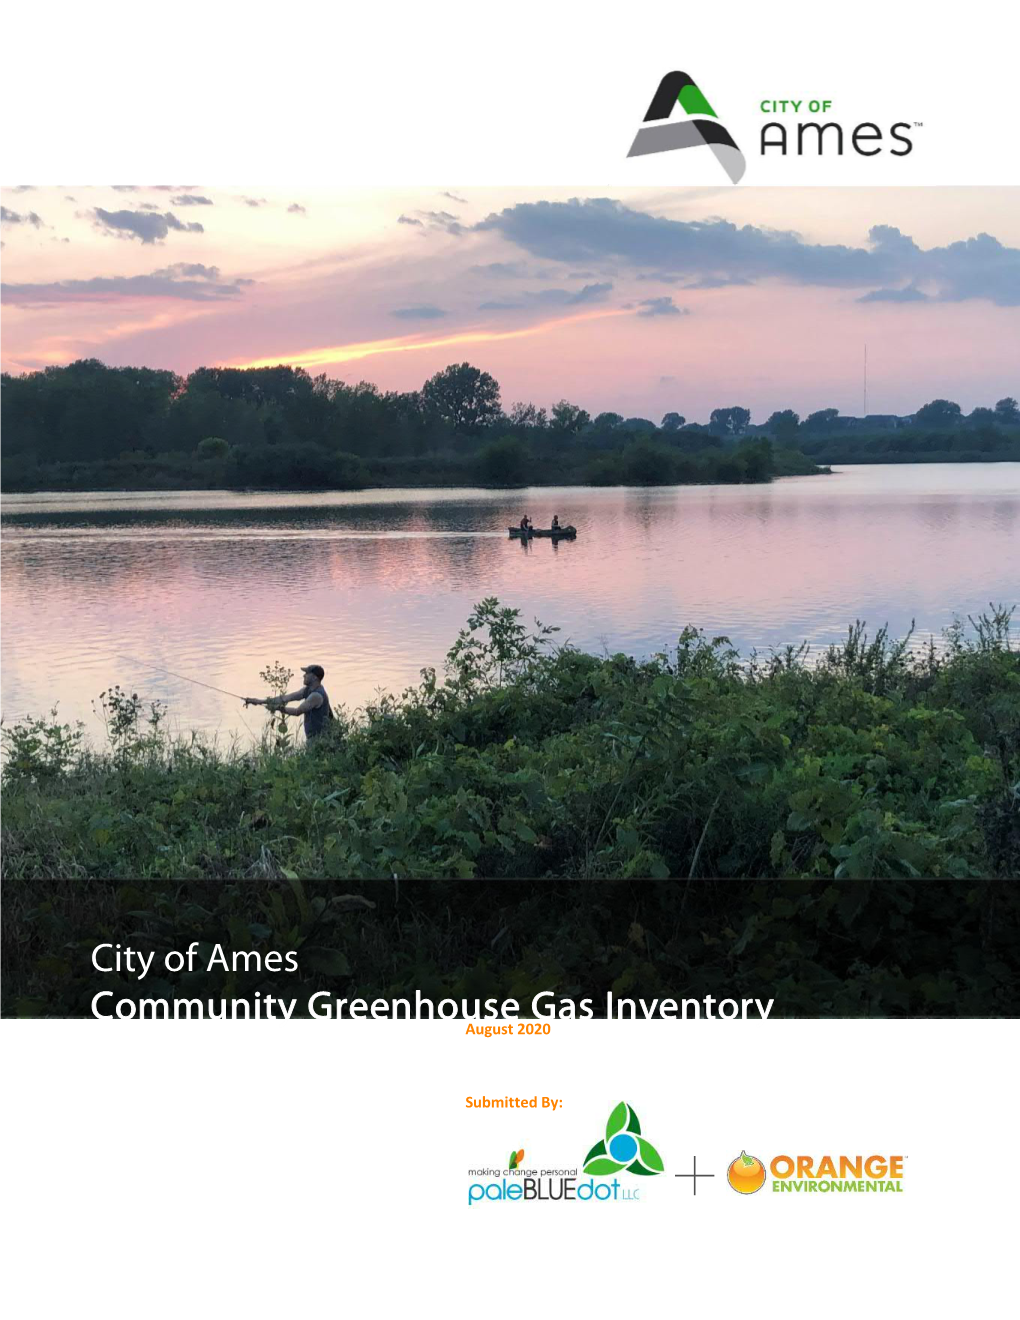 To View the City of Ames Community Greenhouse Gas Inventory